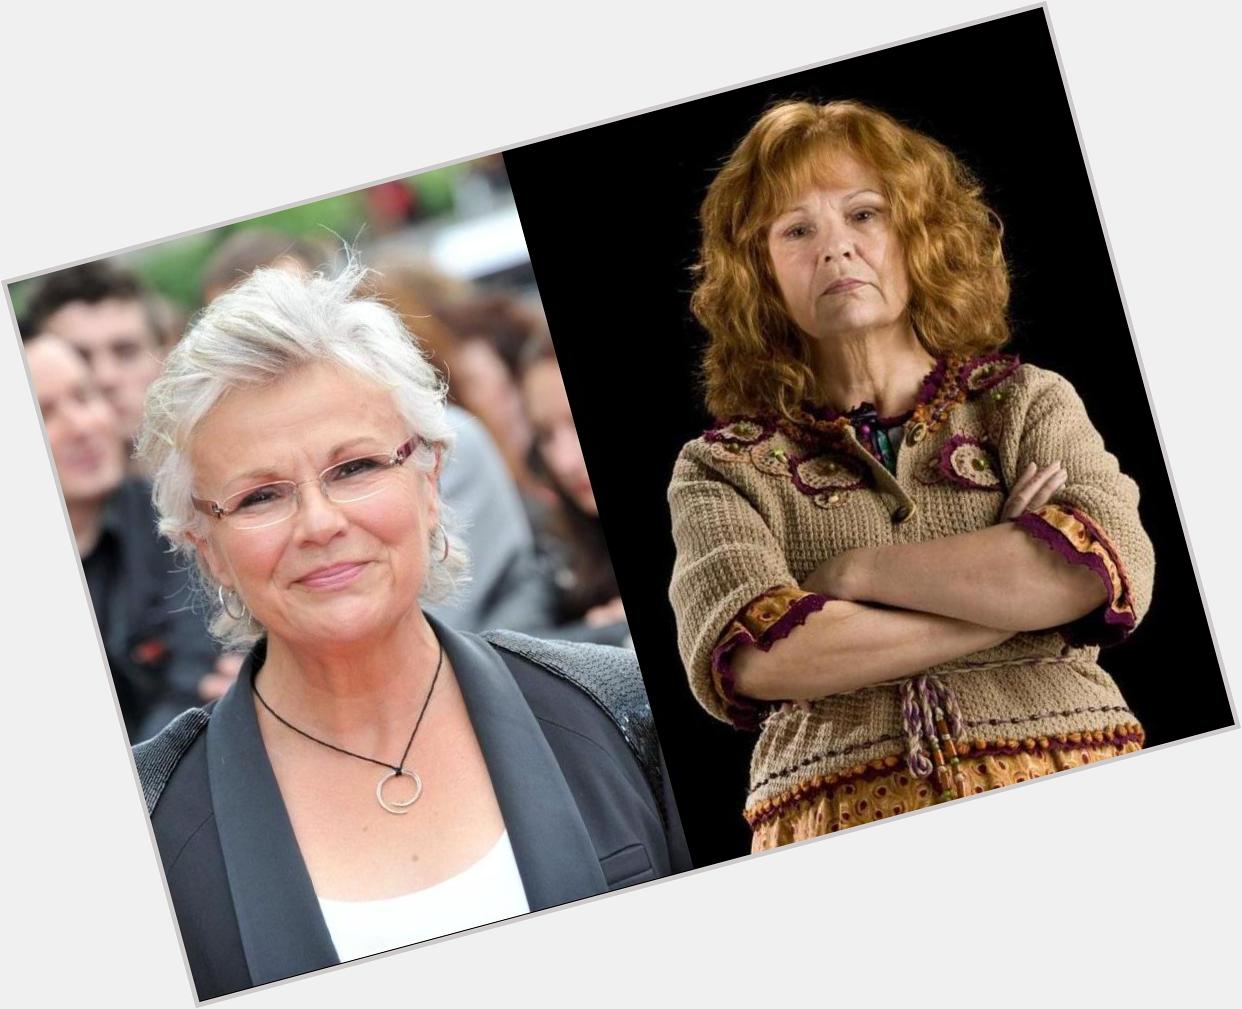 Happy 68th Birthday to Julie Walters! An amazing actress and the perfect Molly Weasley. 